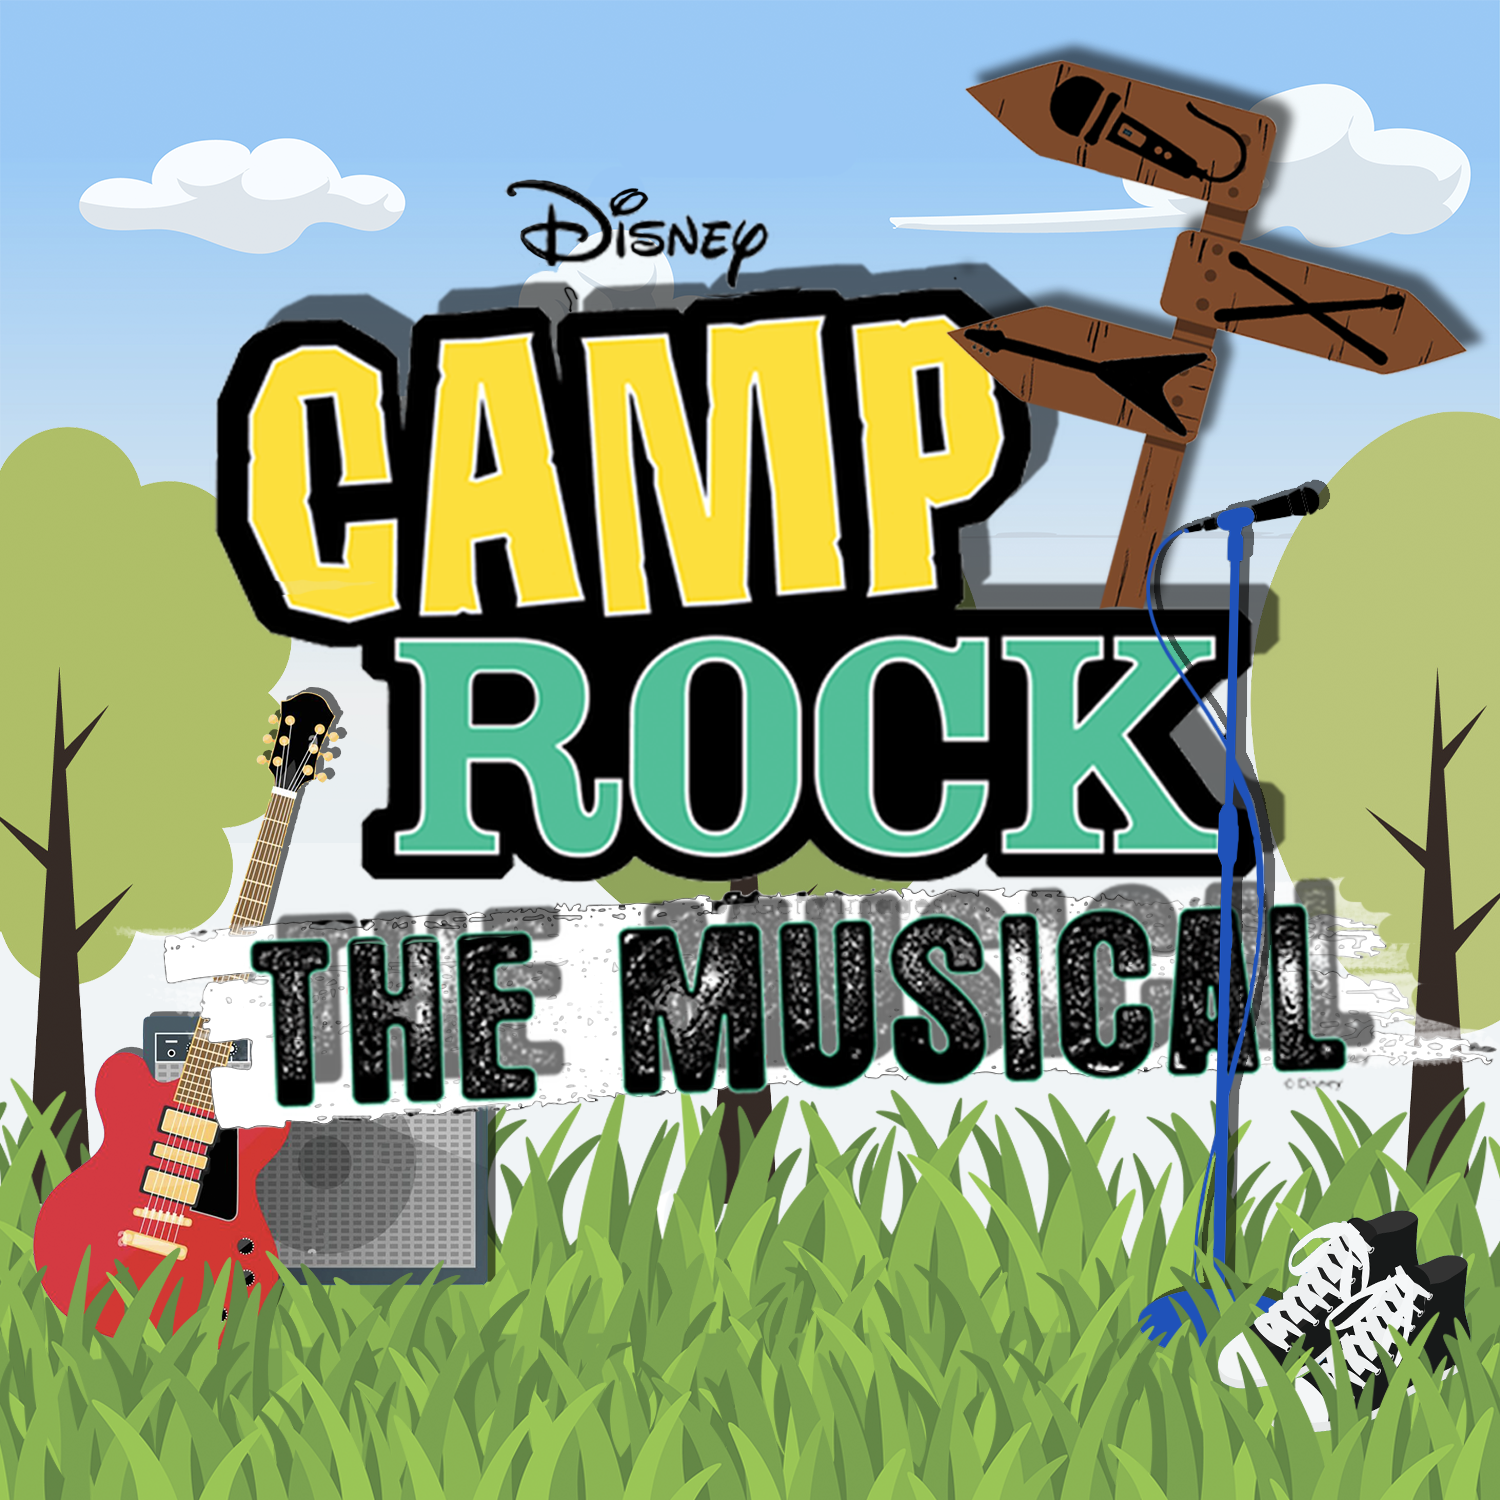 Disney's Camp Rock The Musical